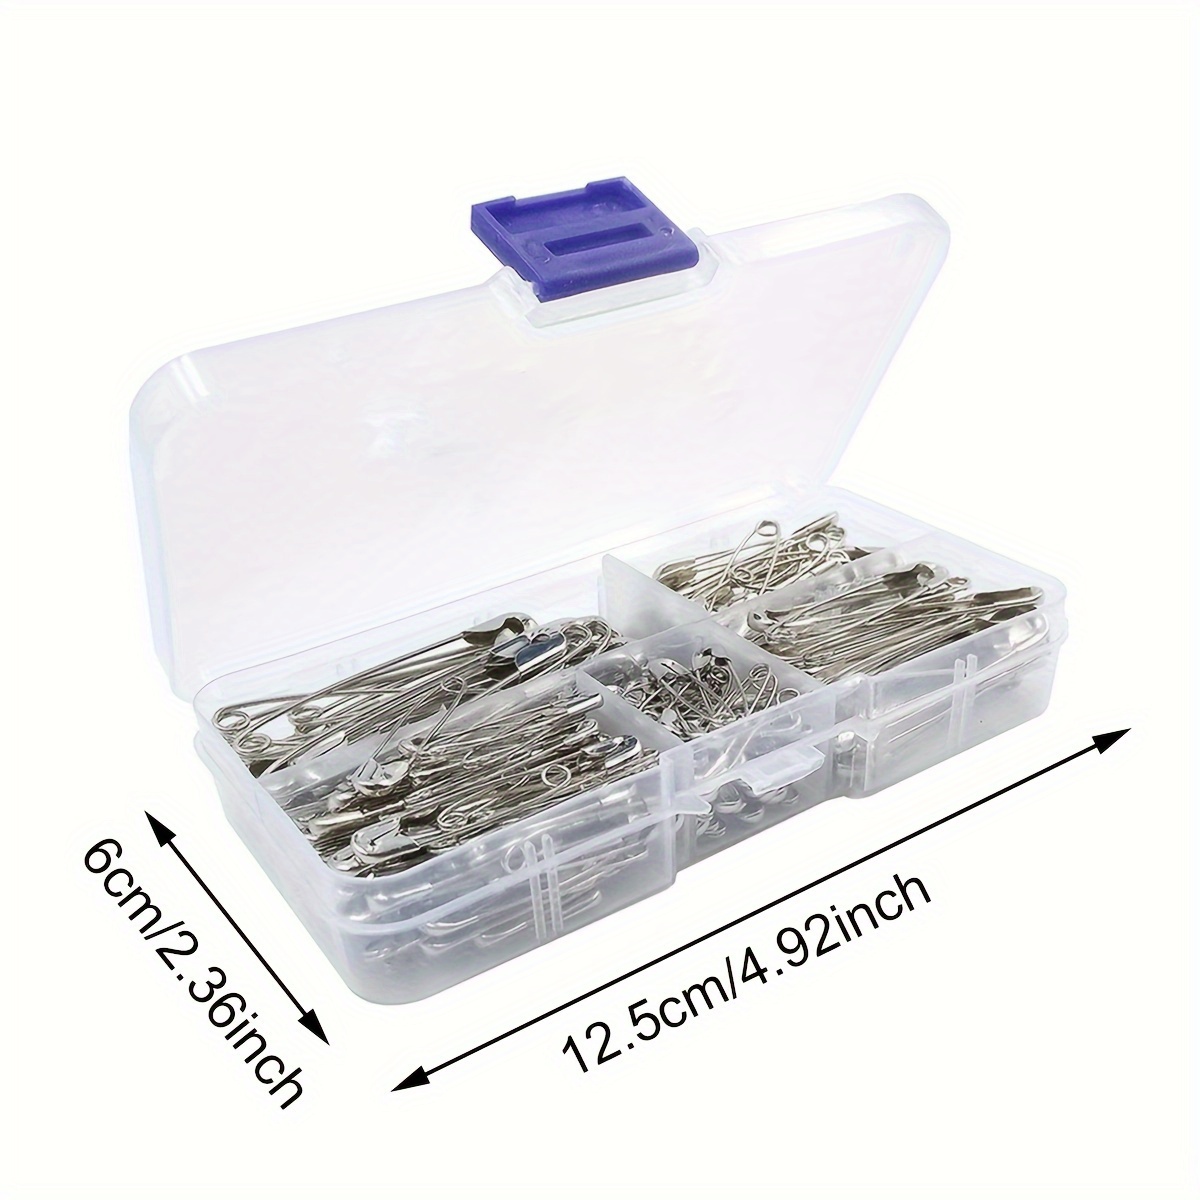 540pcs Safety Pin, Small Large Safety Pins Set Nickel Plated Steel Set With  Storage Box